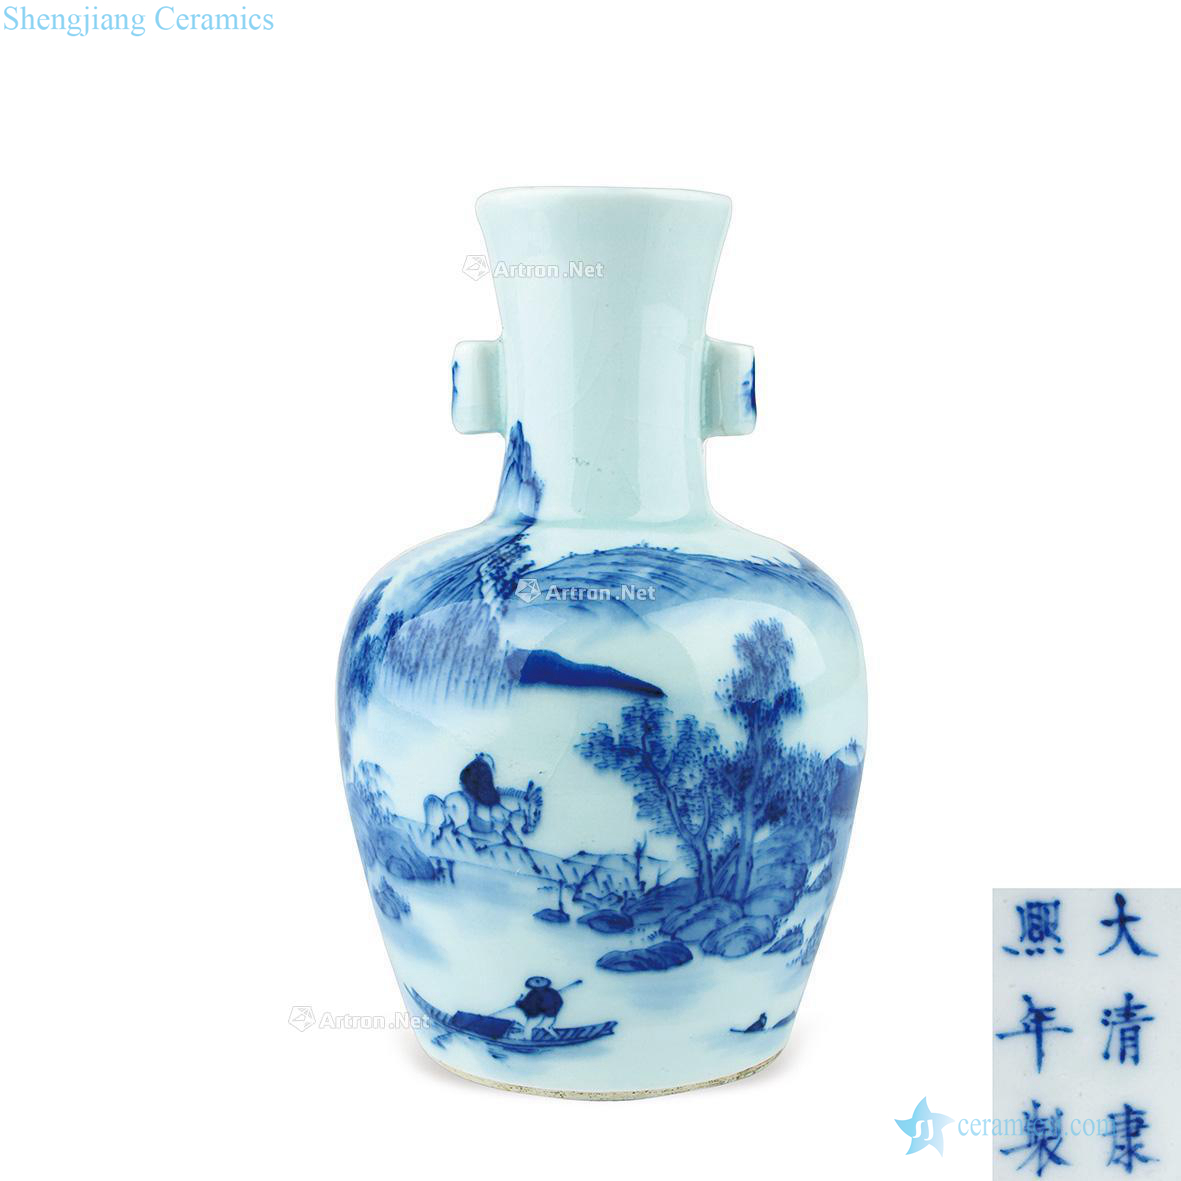 kangxi With the blue and white landscape pattern